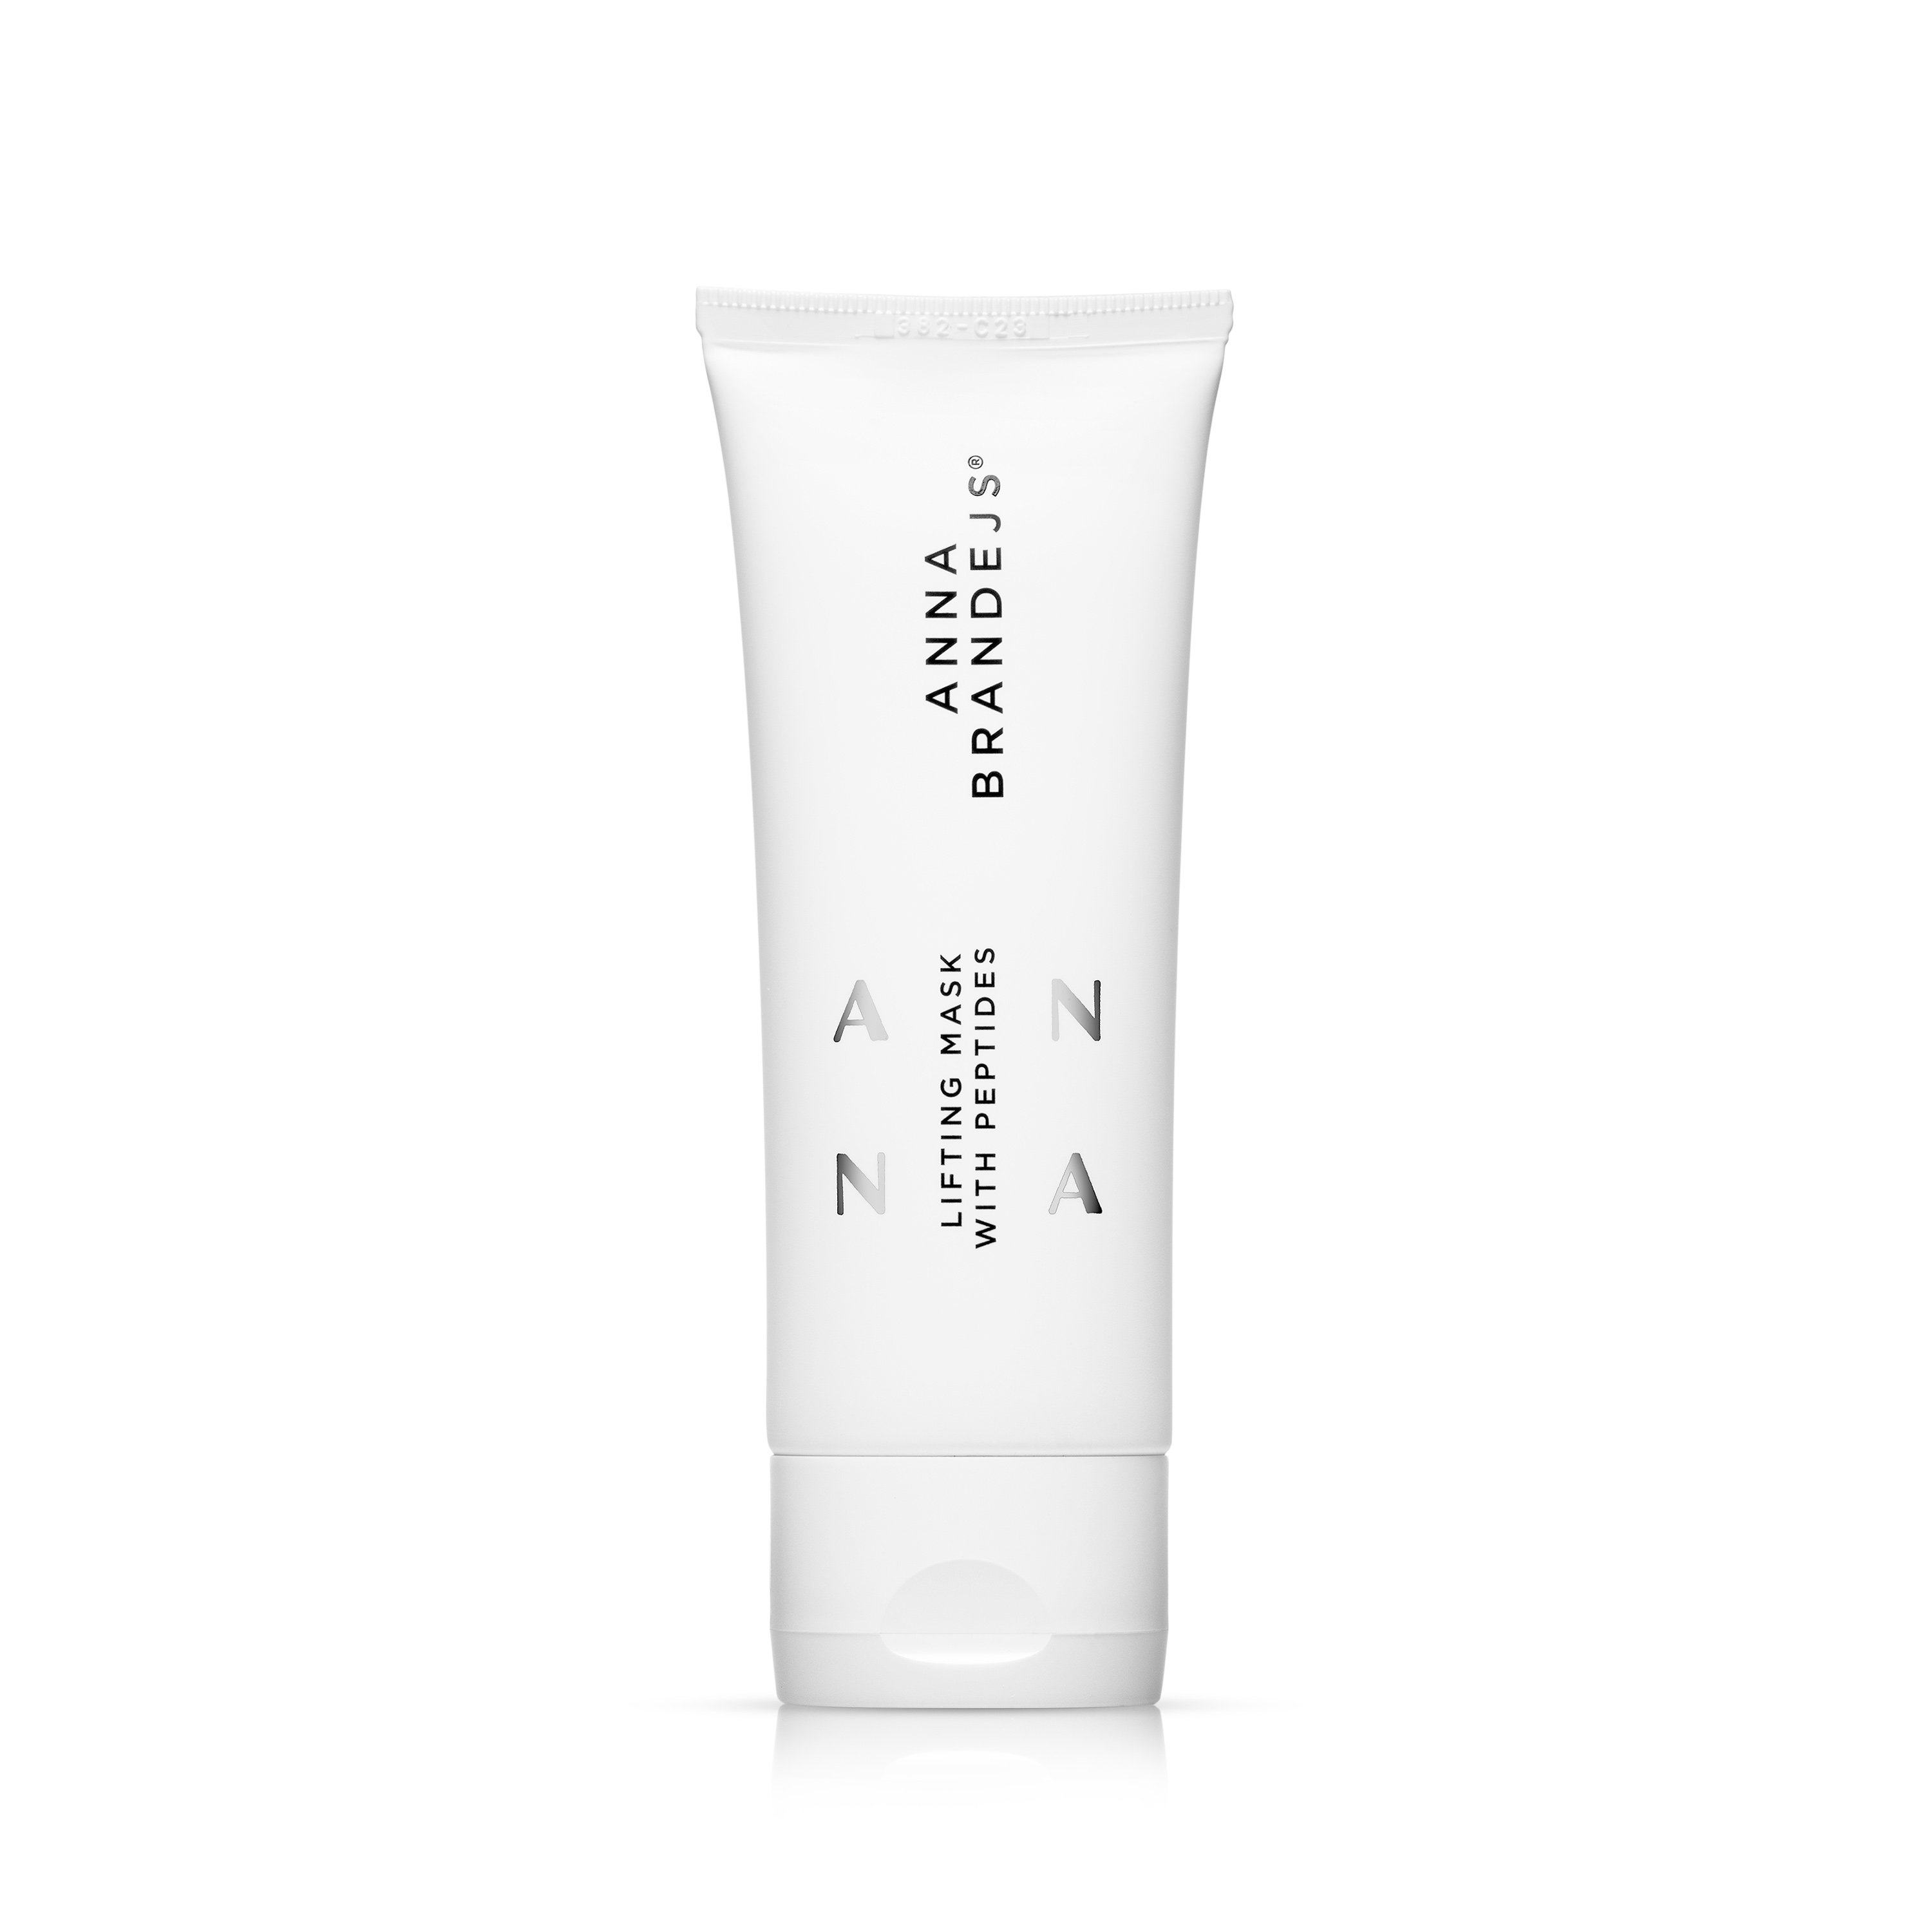 Lifting Mask with Peptides ANNA BRANDEJS